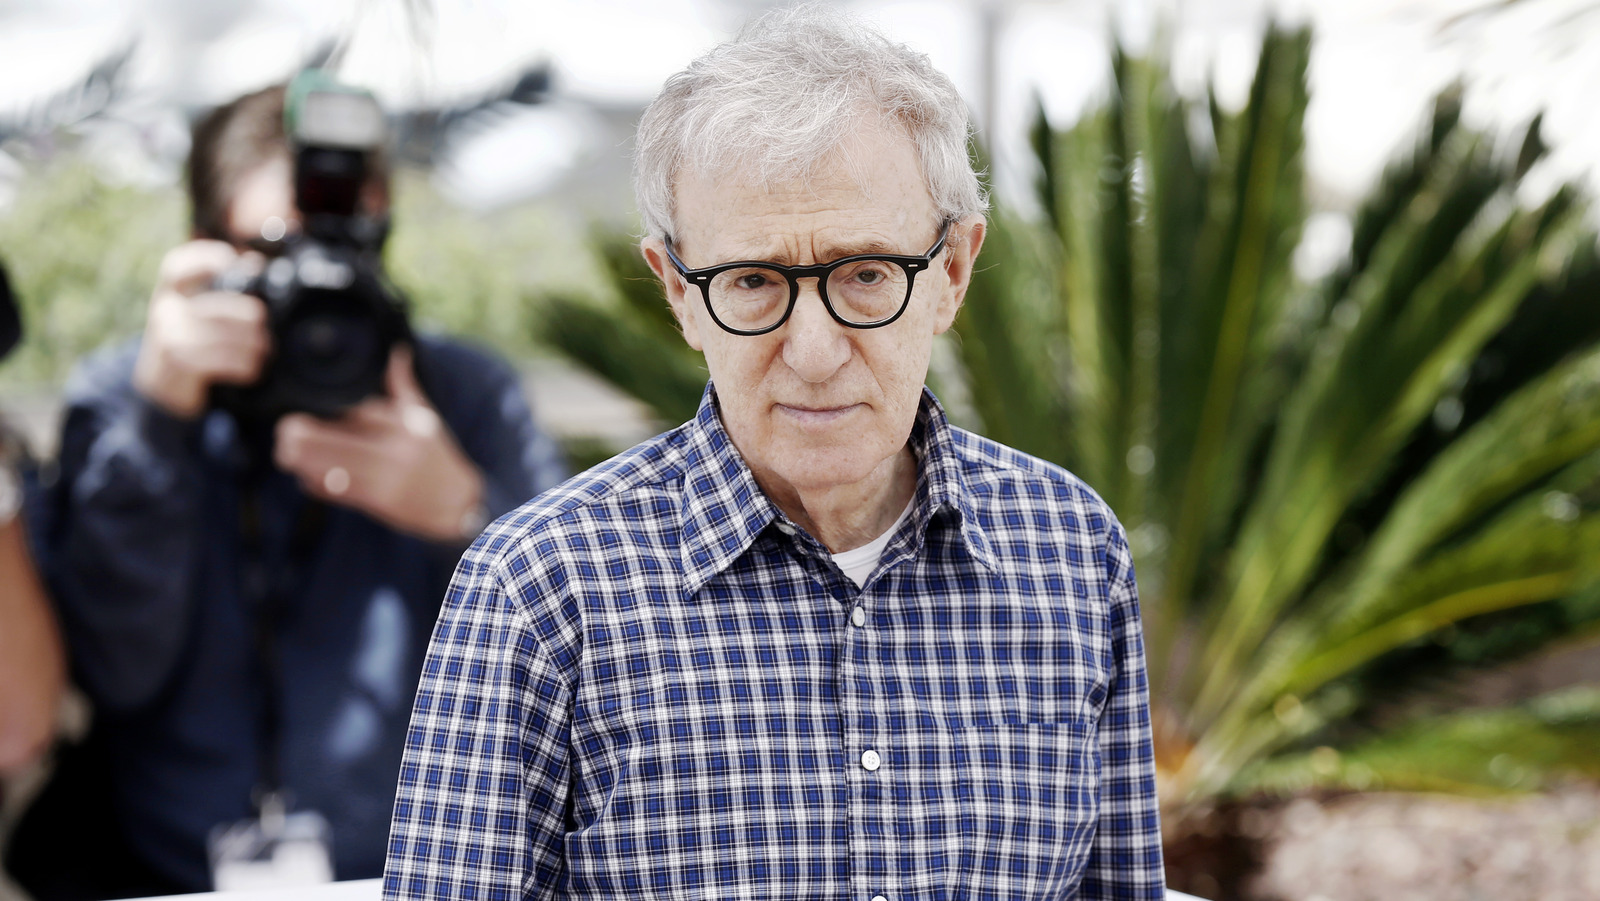 #Woody Allen Plans To Retire From Directing After His Next Movie